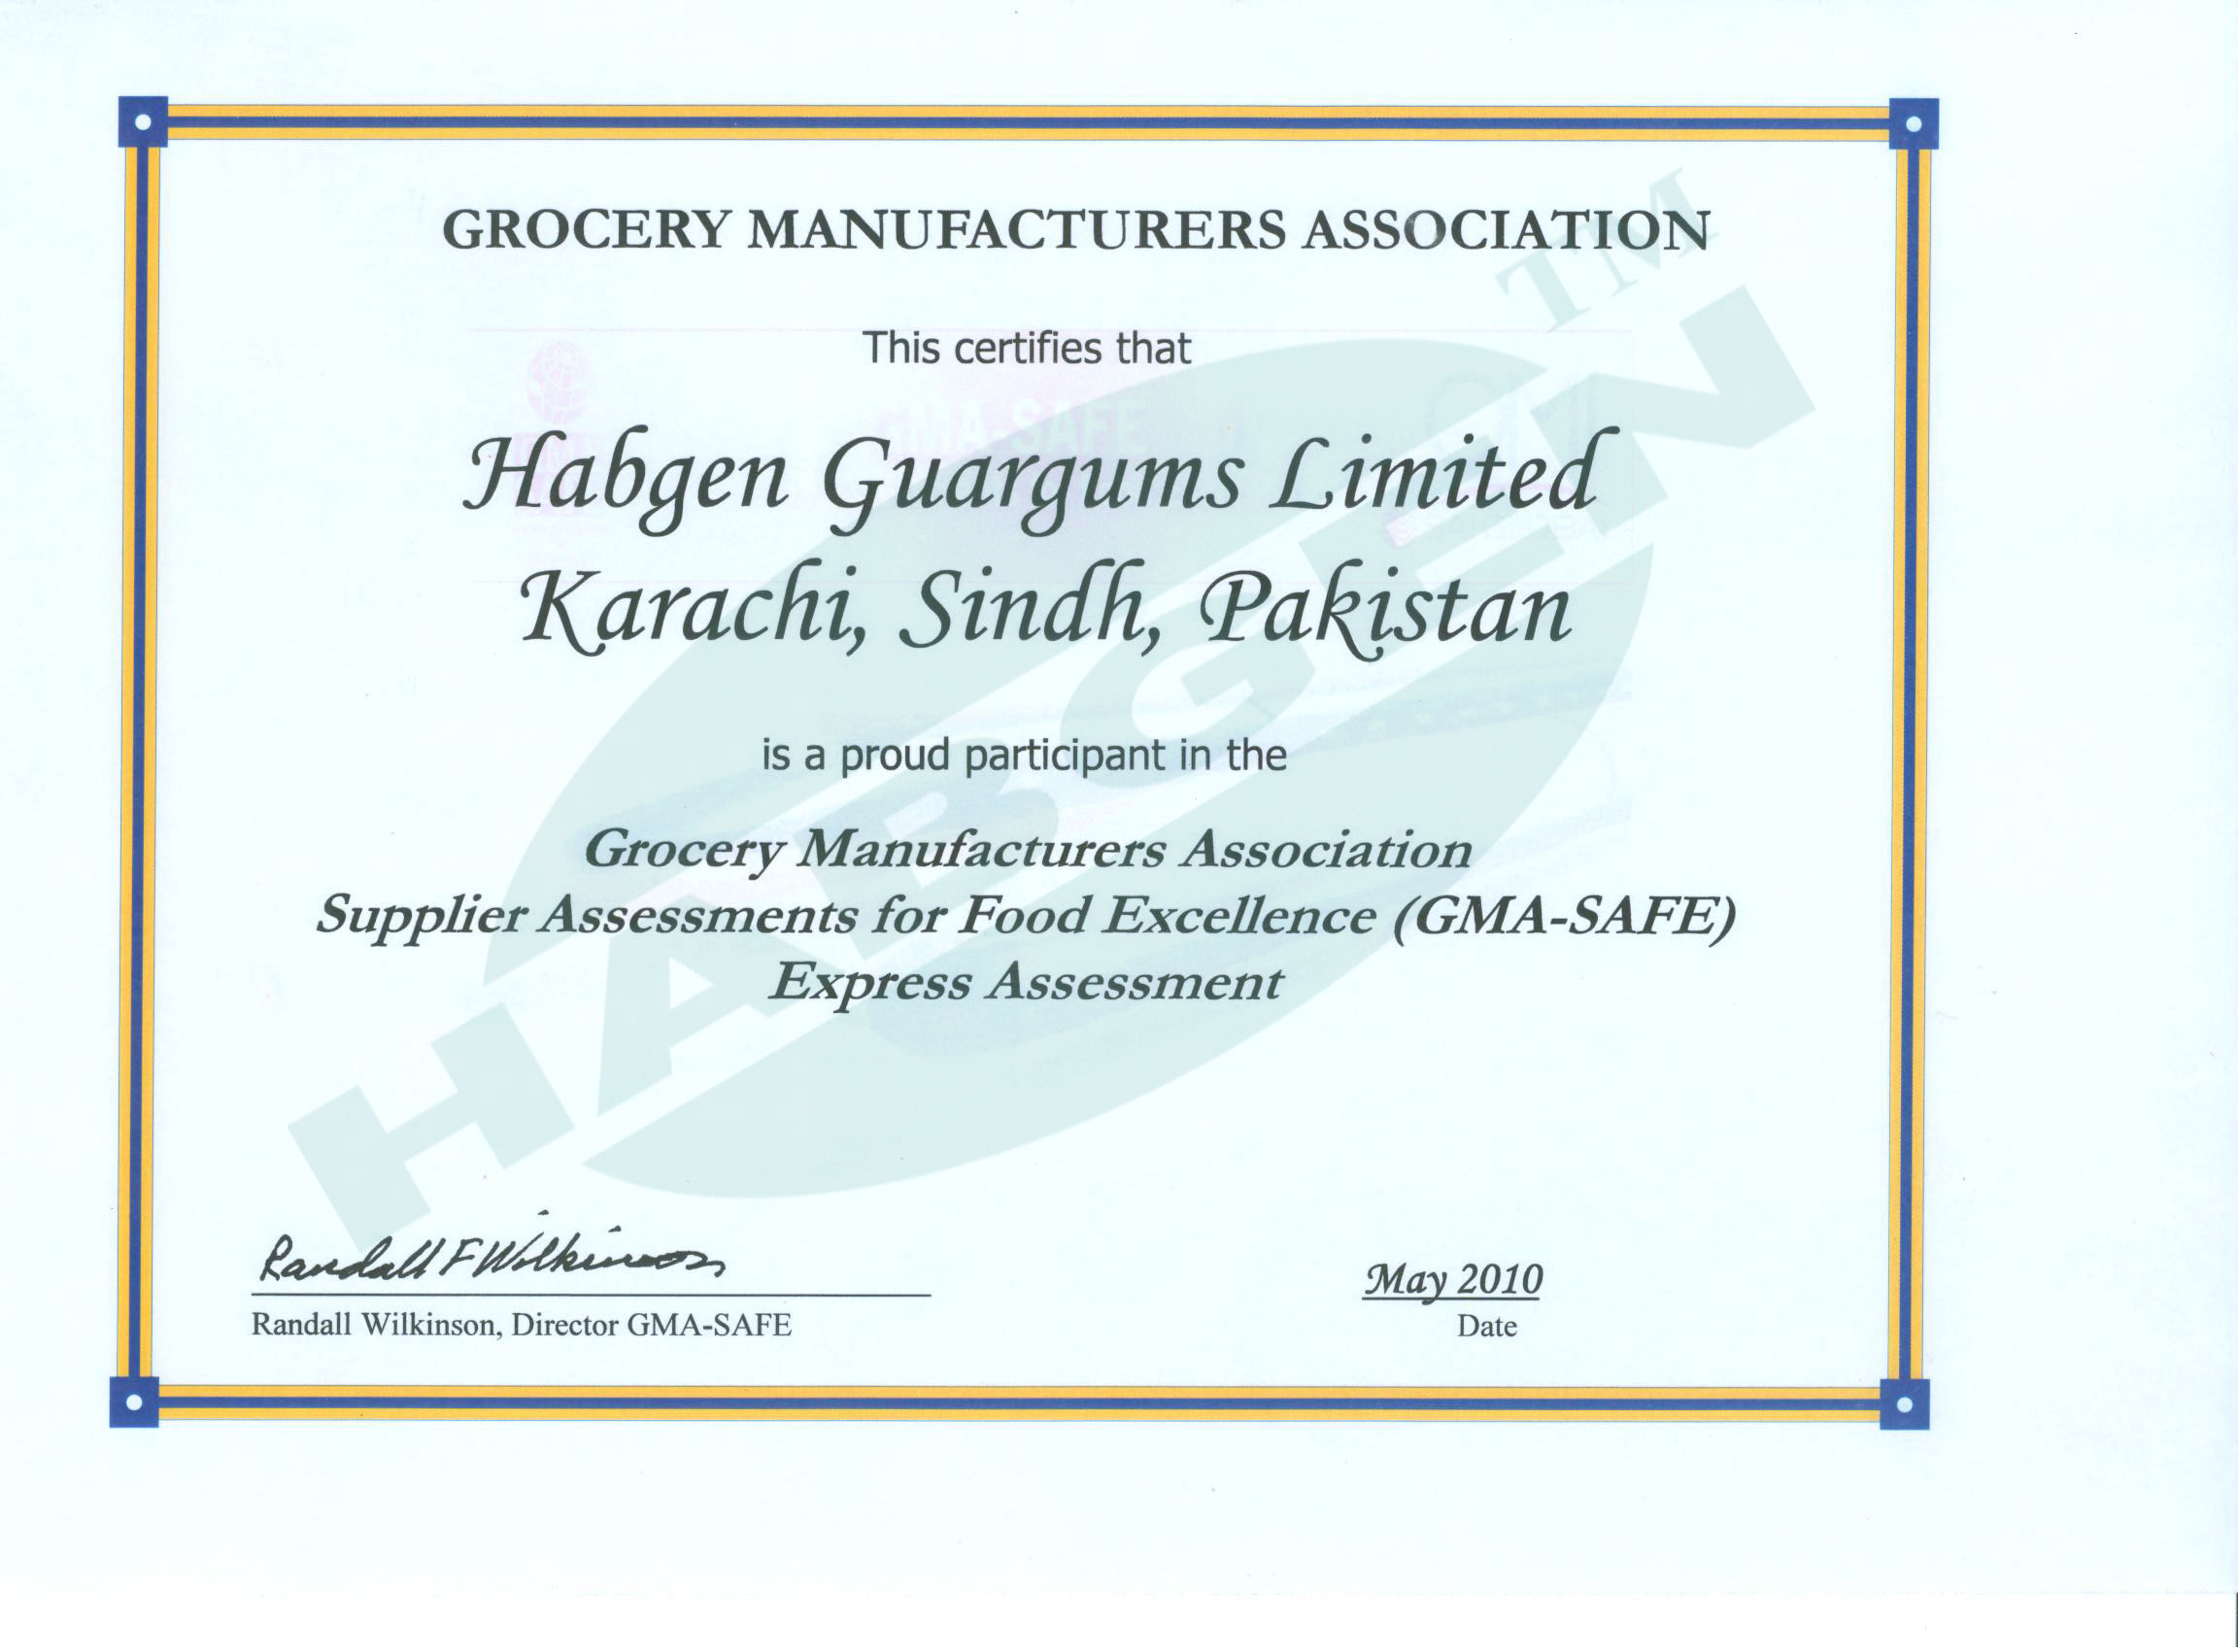 A-Supplier-Assessments-for-Food-Excellence-2010-(GMA-SAFE)